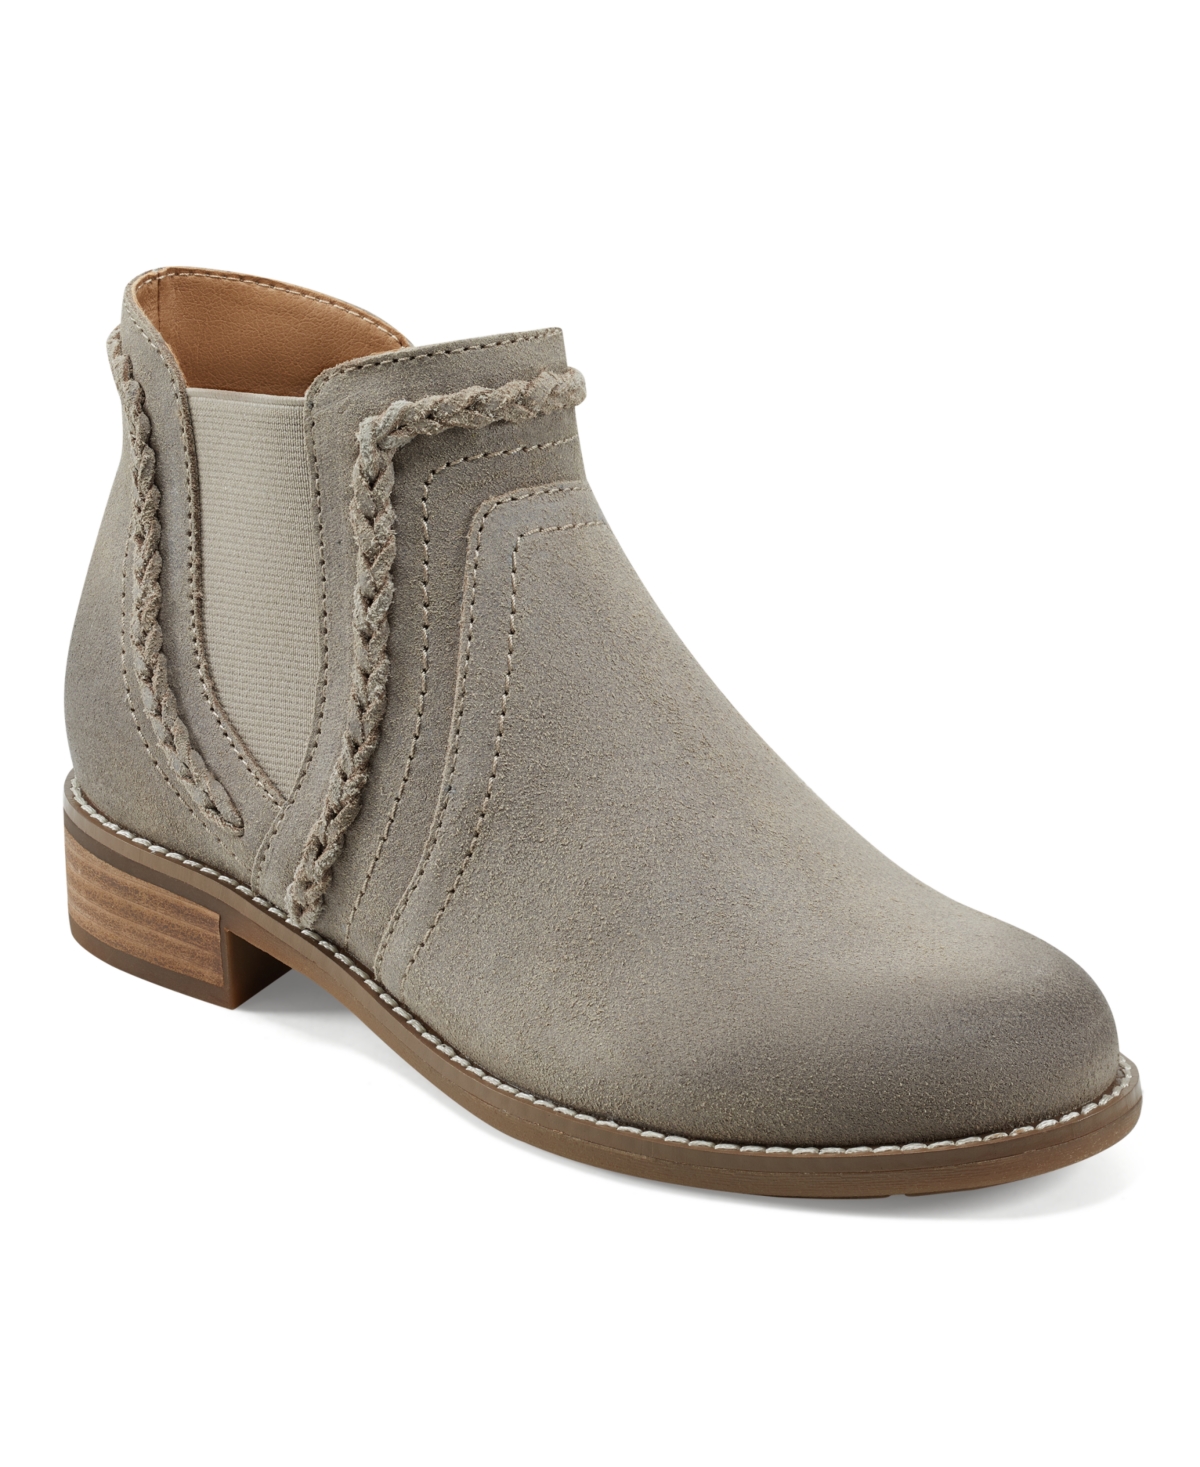 Earth Women's Nika Round Toe Stacked Heel Casual Booties - Taupe Suede